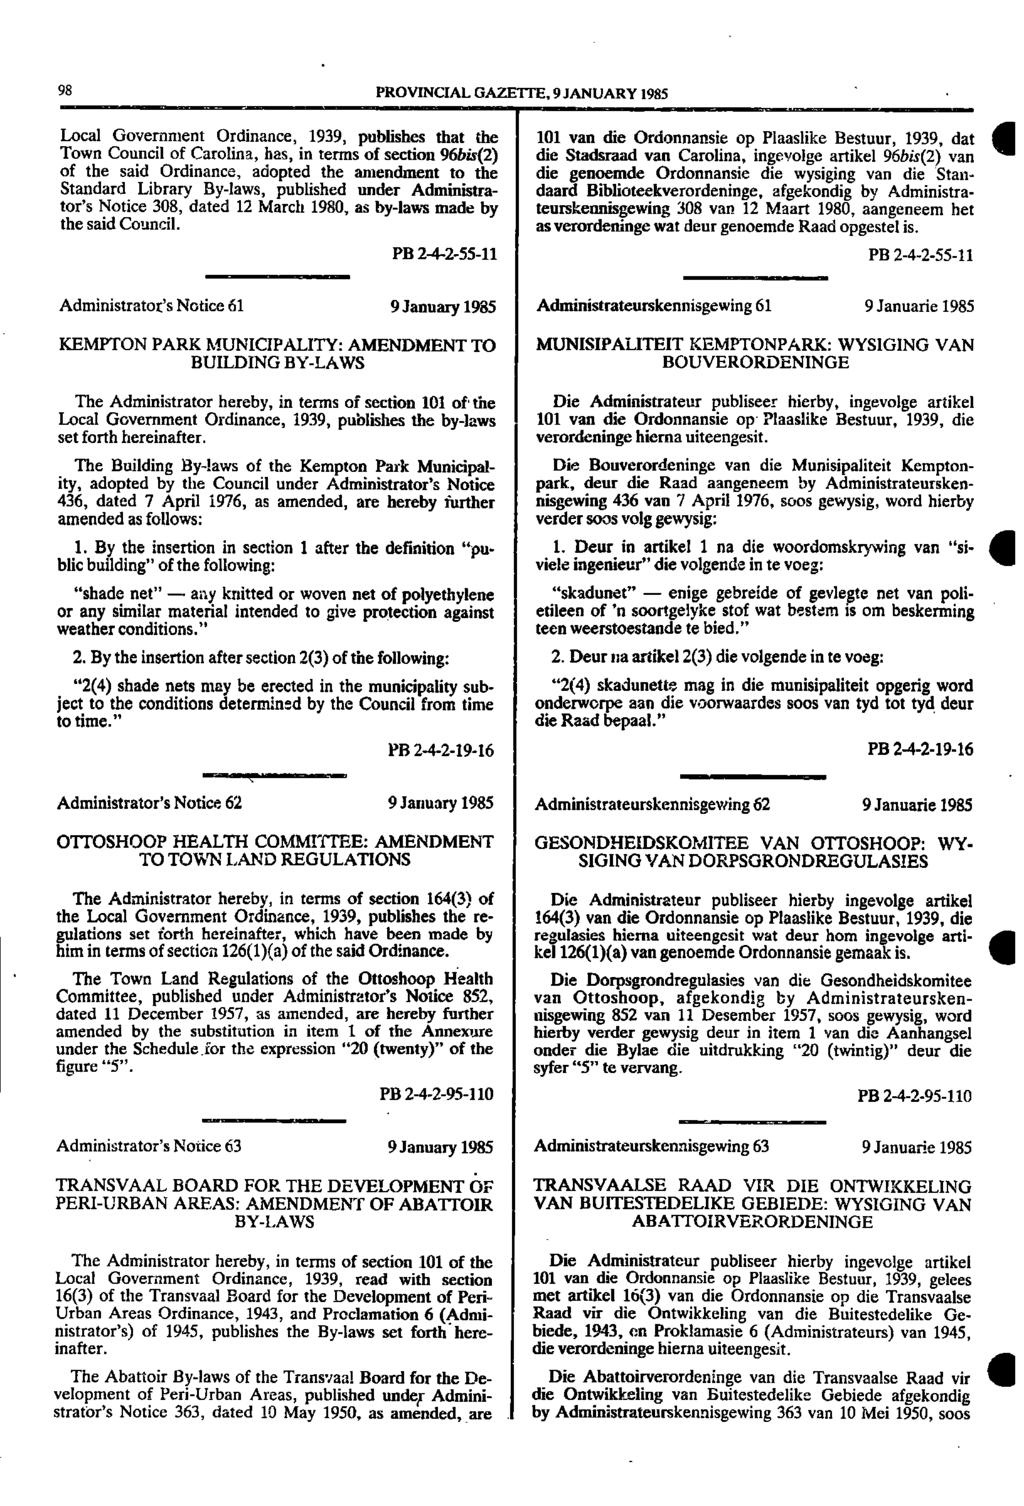 98 PROVINCIAL GAZETTE, 9 JANUARY 1985 Local Government Ordinance, 1939, publishes that the 101 van die Ordonnansie op Plaaslike Bestuur, 1939, dat Town Council of Carolina, has, in terms of section